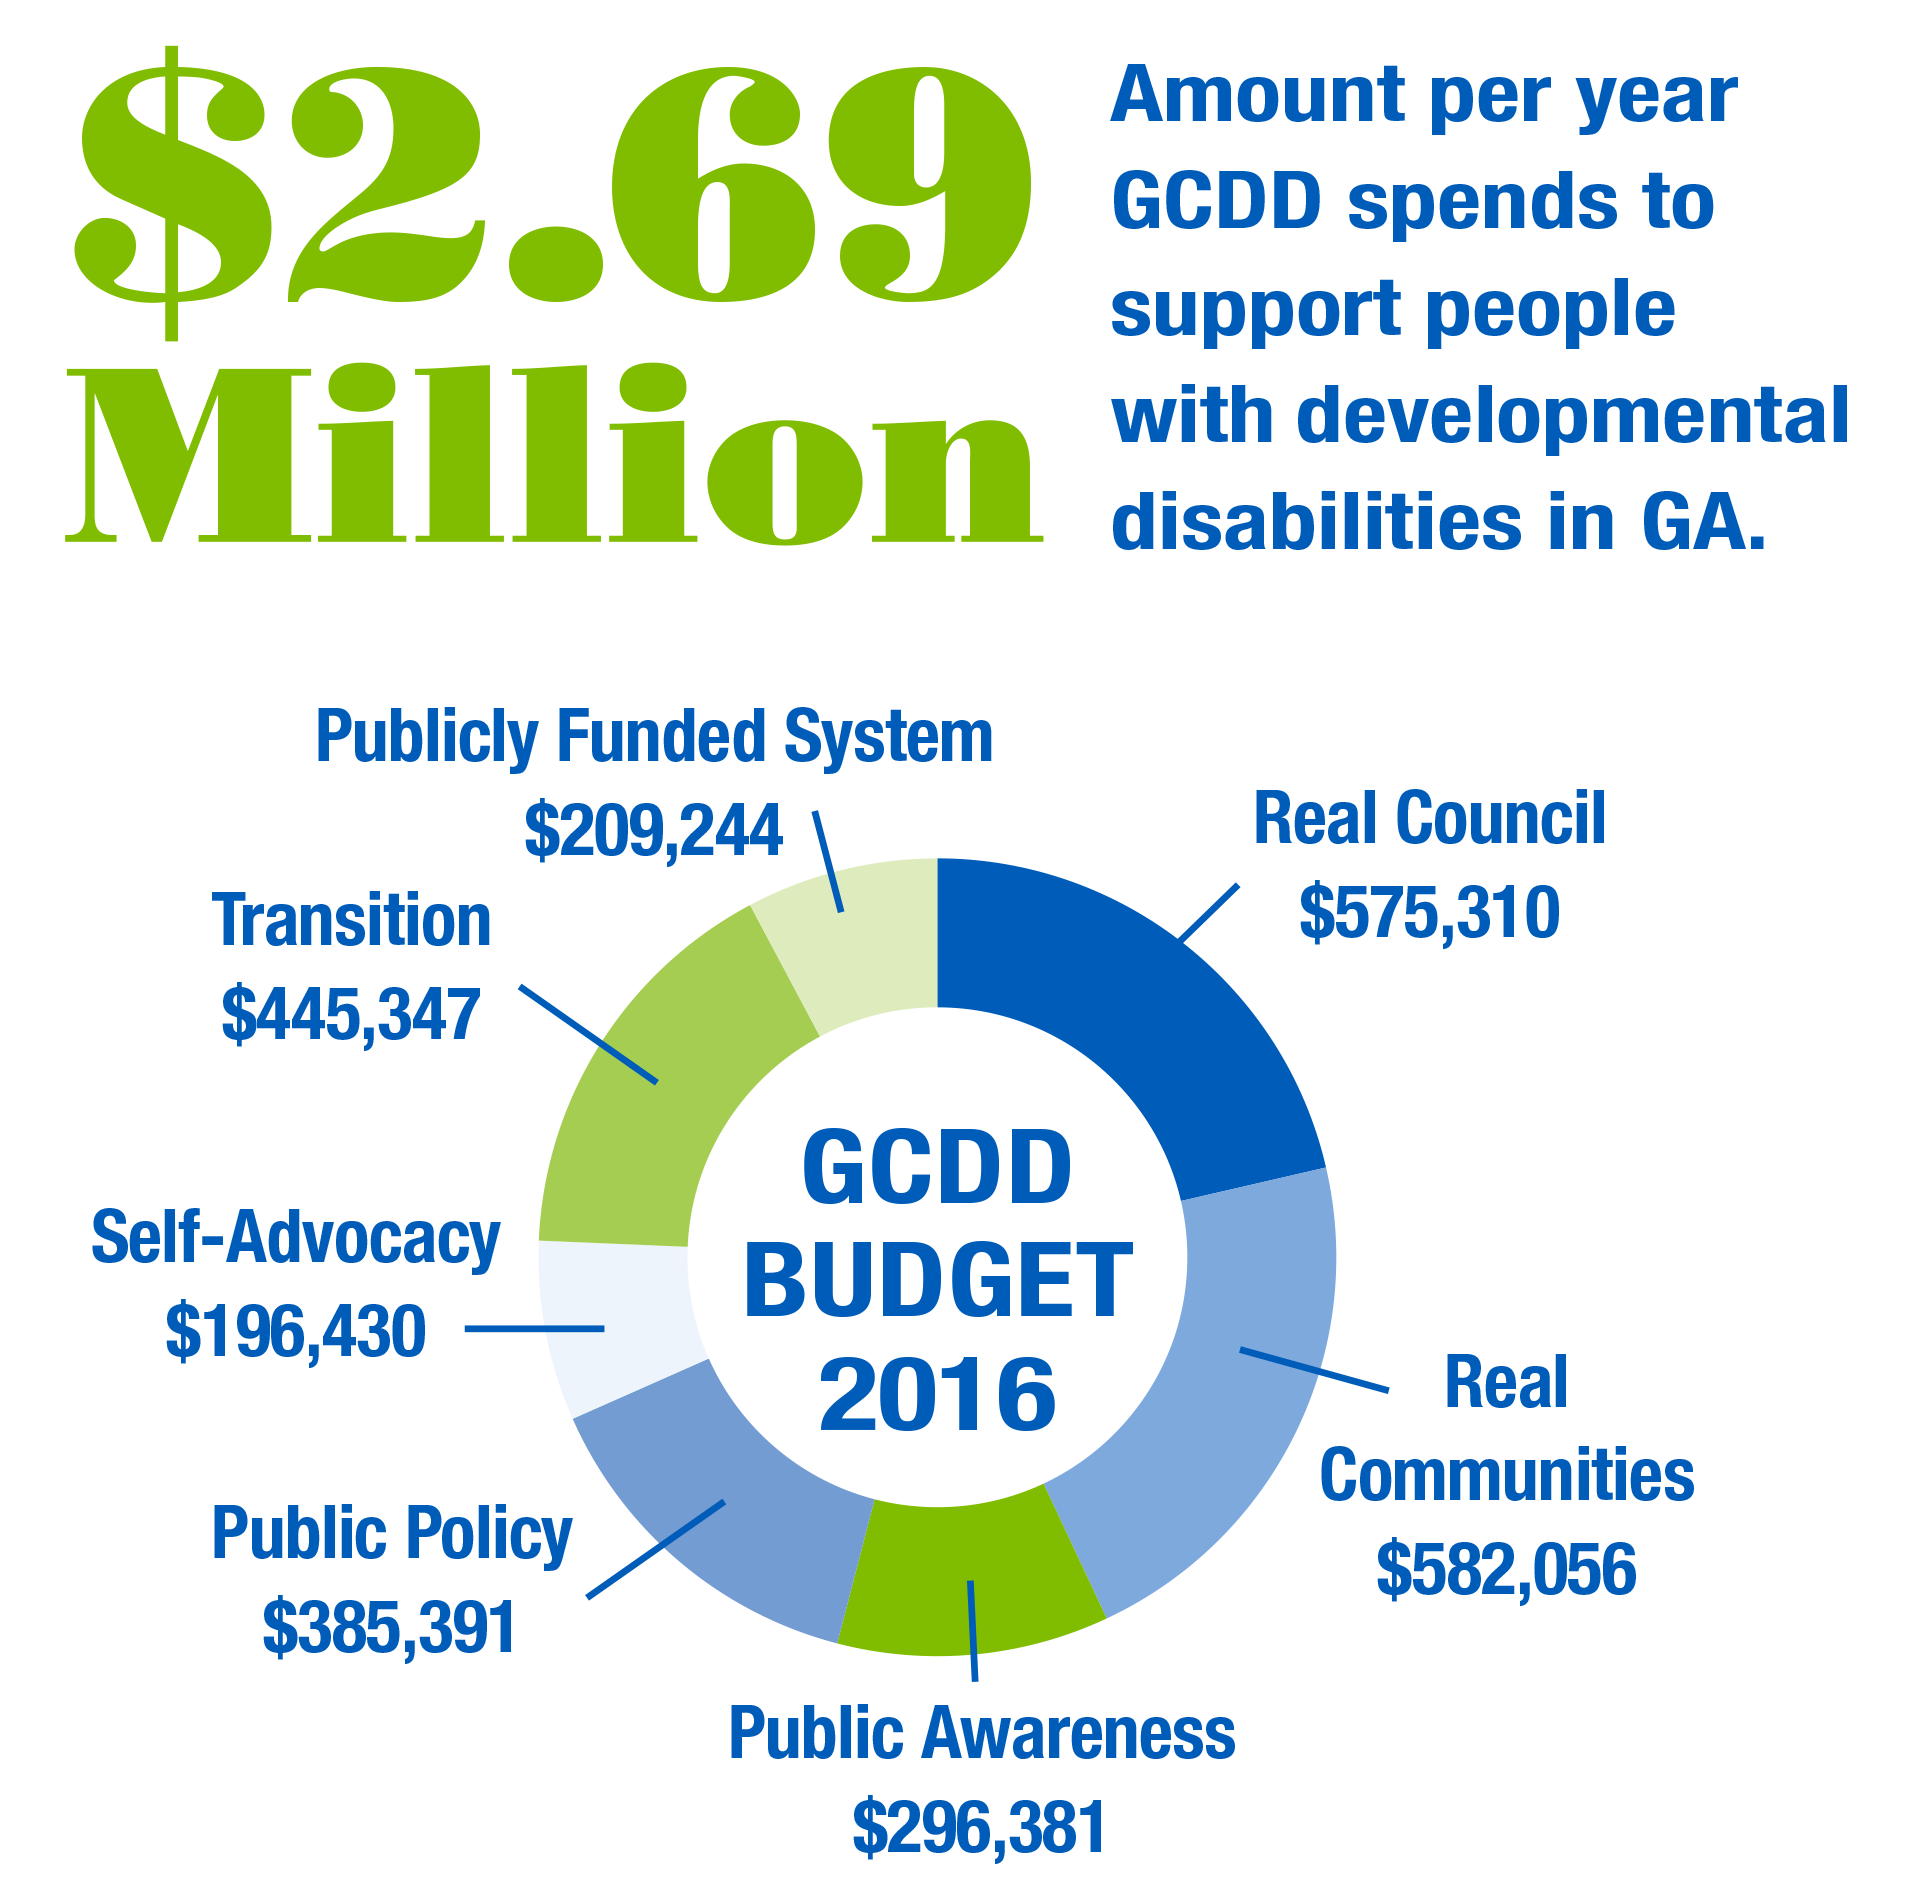 GCDD Budget 2016 - $2.69 Million - Amount per year GCDD spends to support people with developmental disabilities in GA. Real Council: $575,310.00, PRIORITY AREAS: Real Communities: $582,056.00, Public Awareness: $296,381.00, Public Policy: $385,391.00, Self-Advocacy: $196,430.00, Transition: $445,347.00, Public Funded System: $209,244.00, Total Expenditures: $2,690,159.00 